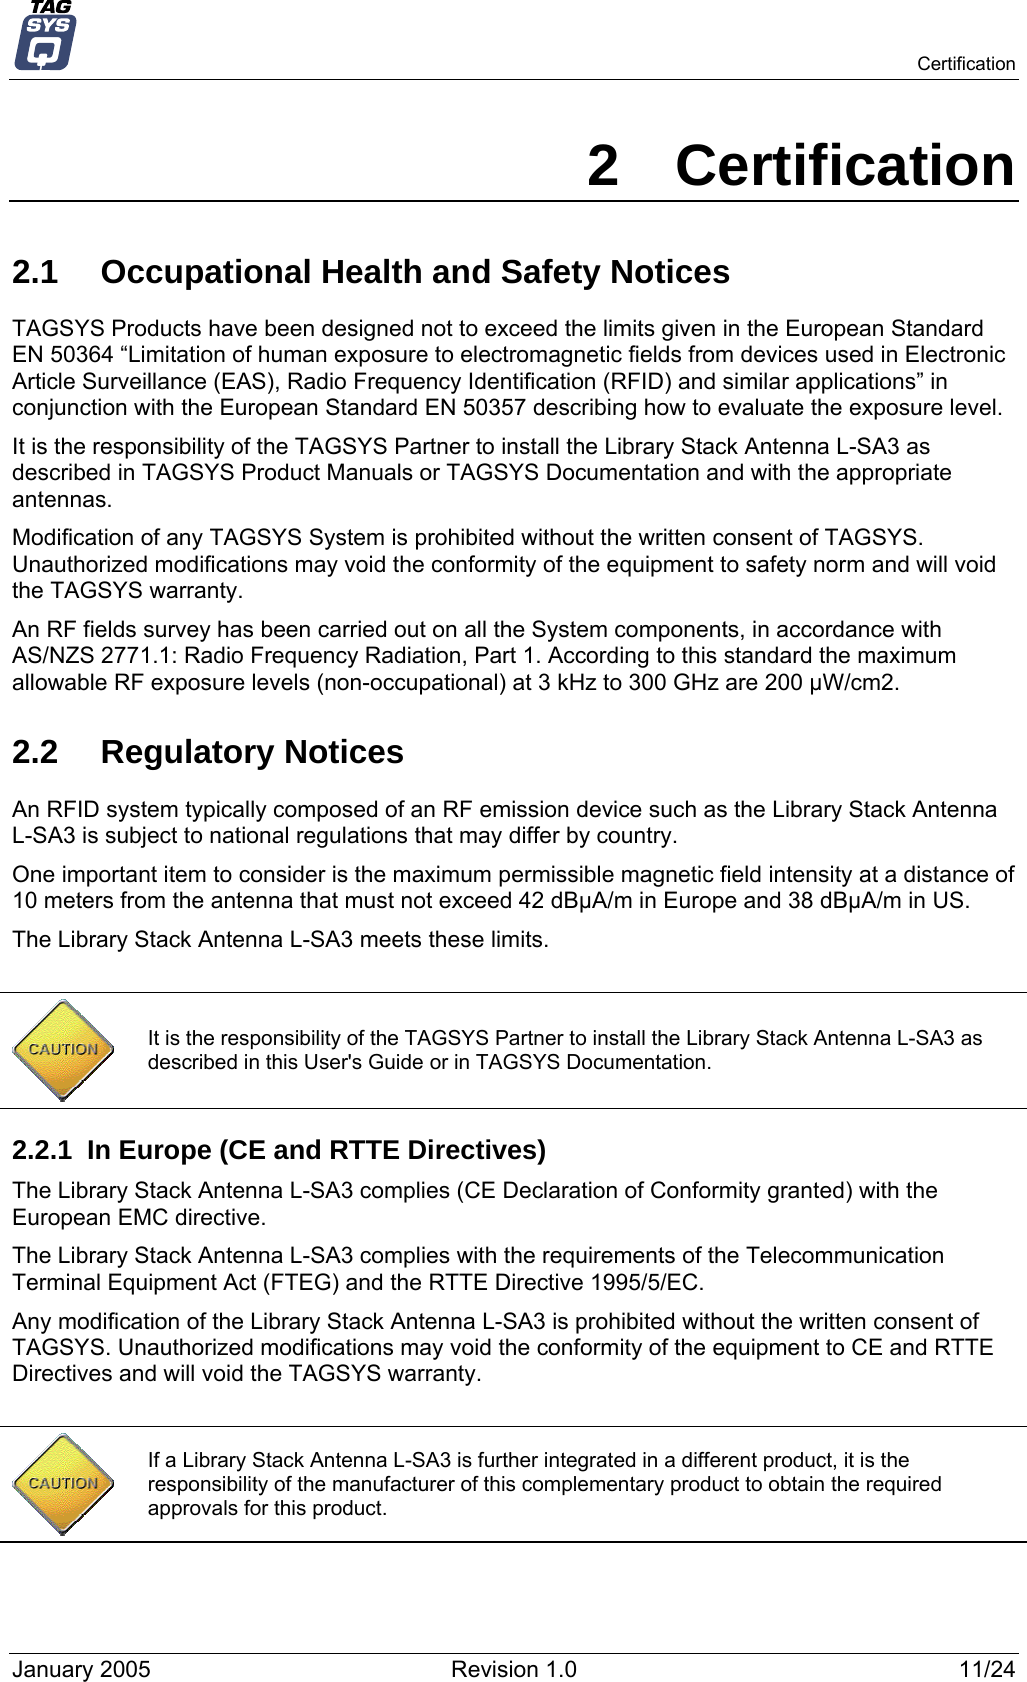   Certification 2 Certification 2.1  Occupational Health and Safety Notices TAGSYS Products have been designed not to exceed the limits given in the European Standard EN 50364 “Limitation of human exposure to electromagnetic fields from devices used in Electronic Article Surveillance (EAS), Radio Frequency Identification (RFID) and similar applications” in conjunction with the European Standard EN 50357 describing how to evaluate the exposure level. It is the responsibility of the TAGSYS Partner to install the Library Stack Antenna L-SA3 as described in TAGSYS Product Manuals or TAGSYS Documentation and with the appropriate antennas.  Modification of any TAGSYS System is prohibited without the written consent of TAGSYS. Unauthorized modifications may void the conformity of the equipment to safety norm and will void the TAGSYS warranty. An RF fields survey has been carried out on all the System components, in accordance with AS/NZS 2771.1: Radio Frequency Radiation, Part 1. According to this standard the maximum allowable RF exposure levels (non-occupational) at 3 kHz to 300 GHz are 200 µW/cm2.  2.2 Regulatory Notices An RFID system typically composed of an RF emission device such as the Library Stack Antenna L-SA3 is subject to national regulations that may differ by country. One important item to consider is the maximum permissible magnetic field intensity at a distance of 10 meters from the antenna that must not exceed 42 dBµA/m in Europe and 38 dBµA/m in US. The Library Stack Antenna L-SA3 meets these limits.   It is the responsibility of the TAGSYS Partner to install the Library Stack Antenna L-SA3 as described in this User&apos;s Guide or in TAGSYS Documentation. 2.2.1  In Europe (CE and RTTE Directives)  The Library Stack Antenna L-SA3 complies (CE Declaration of Conformity granted) with the European EMC directive. The Library Stack Antenna L-SA3 complies with the requirements of the Telecommunication Terminal Equipment Act (FTEG) and the RTTE Directive 1995/5/EC. Any modification of the Library Stack Antenna L-SA3 is prohibited without the written consent of TAGSYS. Unauthorized modifications may void the conformity of the equipment to CE and RTTE Directives and will void the TAGSYS warranty.   If a Library Stack Antenna L-SA3 is further integrated in a different product, it is the responsibility of the manufacturer of this complementary product to obtain the required approvals for this product. January 2005  Revision 1.0  11/24 